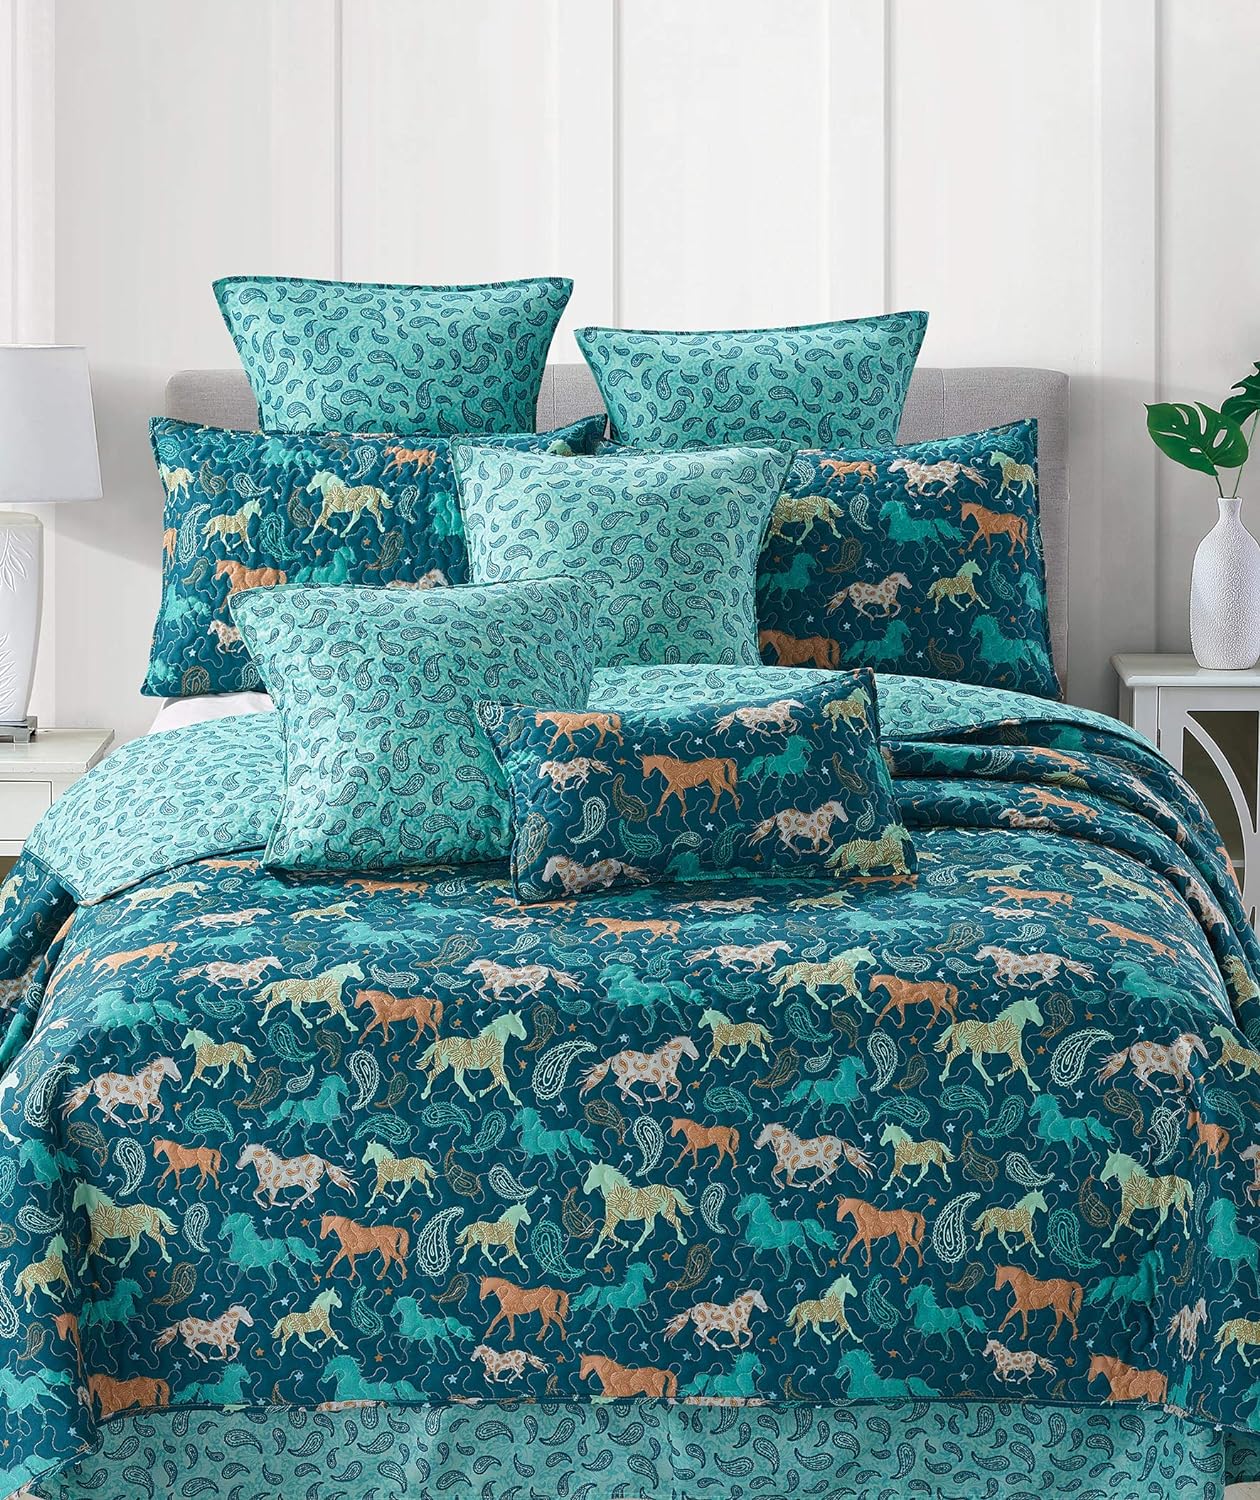 Virah Bella Quilt Bedding Set in King Horses Free Printed Lightweight Reversible Quilt with 2 Matching Pillow Shams - Cozy & Beautiful Western-Themed Bedding